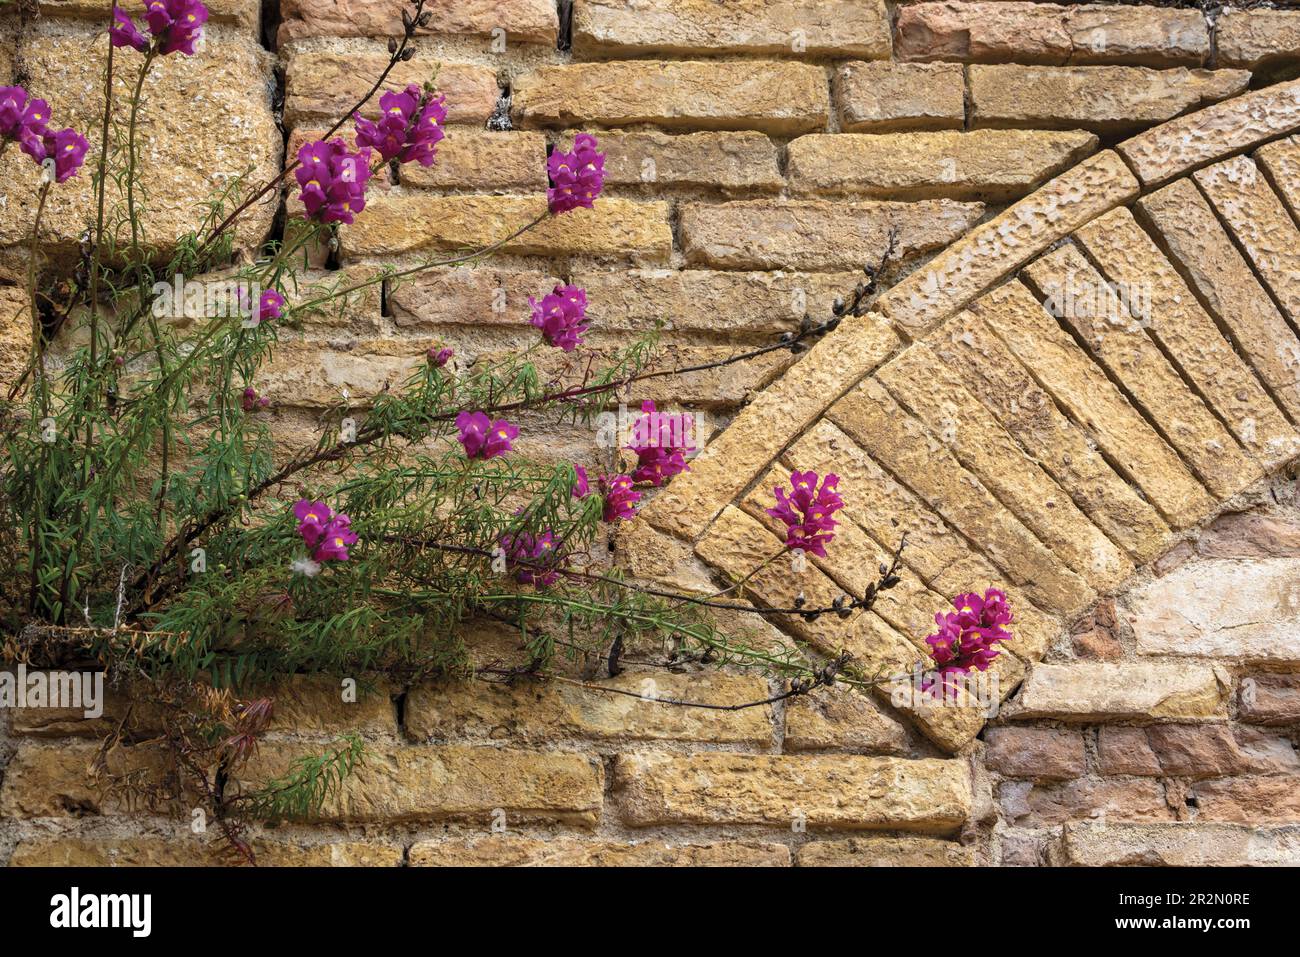 Ancient bricked in stone arch and flowers.  San Gimignano, Siena Province, Tuscany, Italy.   San Gimignano is a UNESCO World Heritage Site. Stock Photo